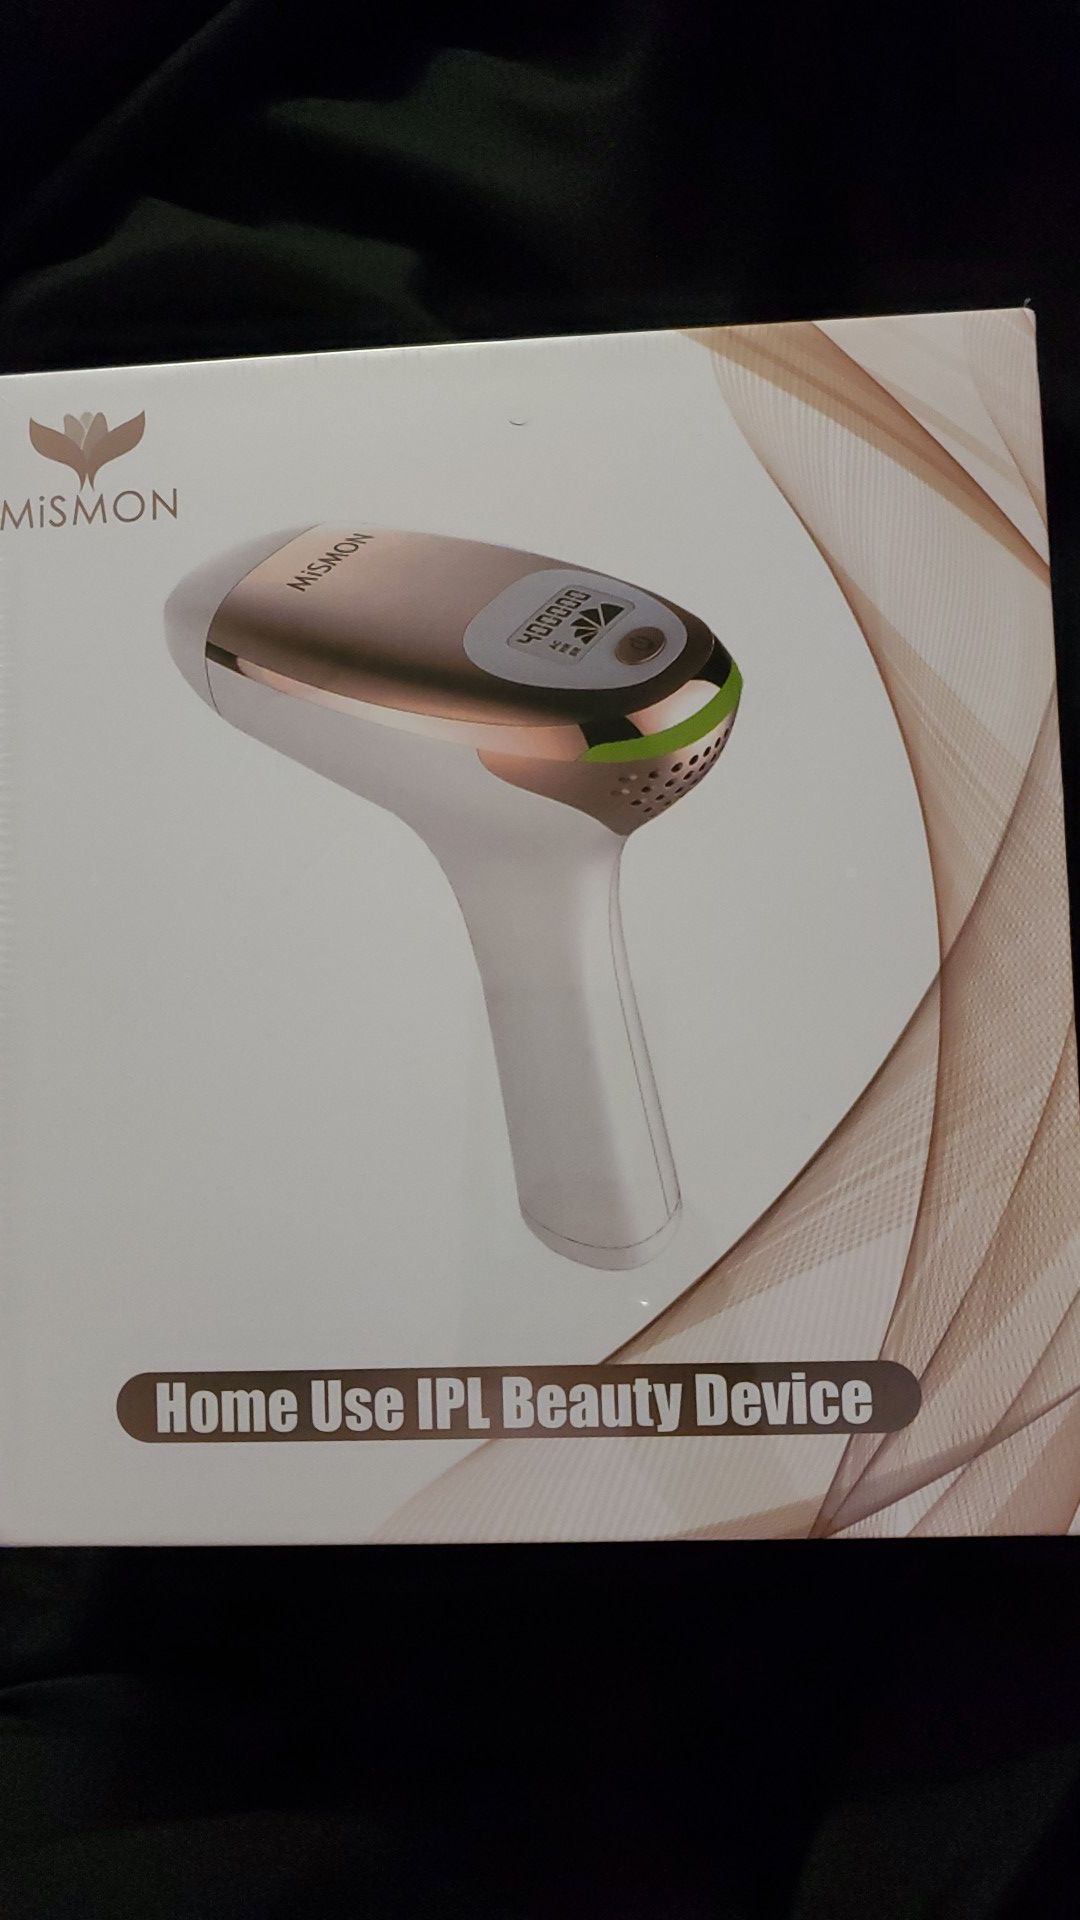 Mismon - At Home Use IPL Beauty Device (Laser)